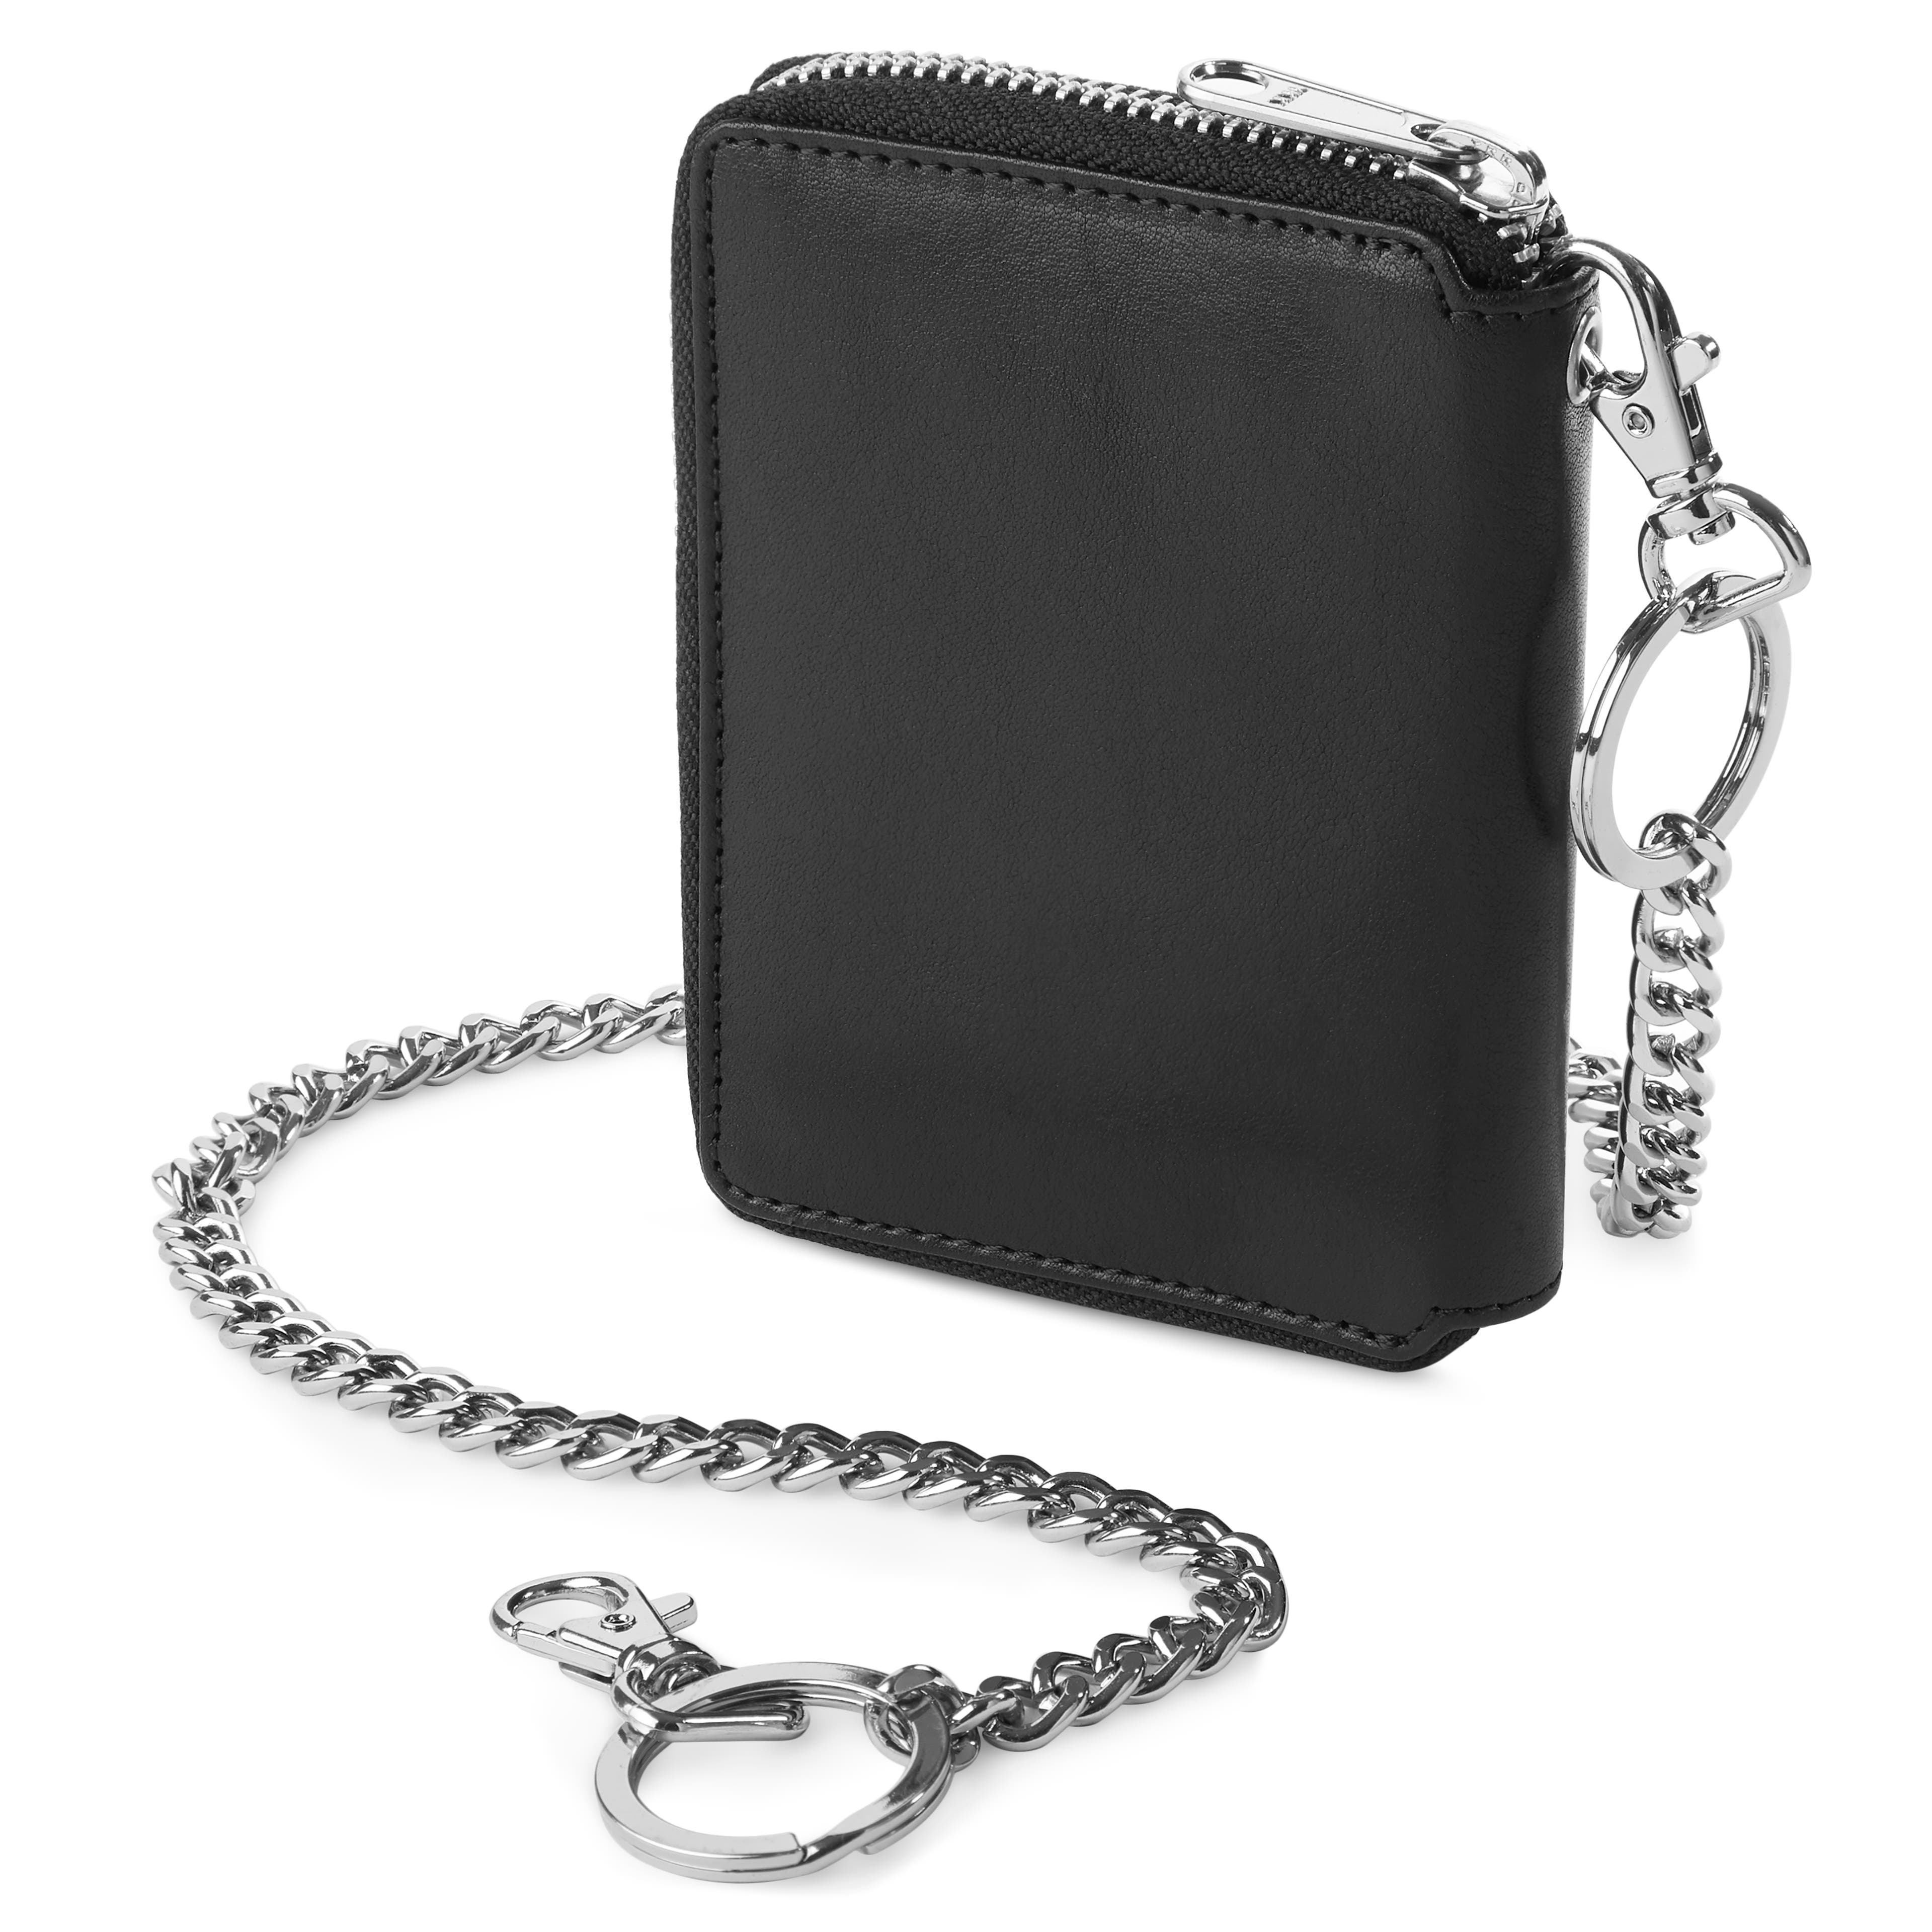 Lincoln | Black Leather RFID Wallet